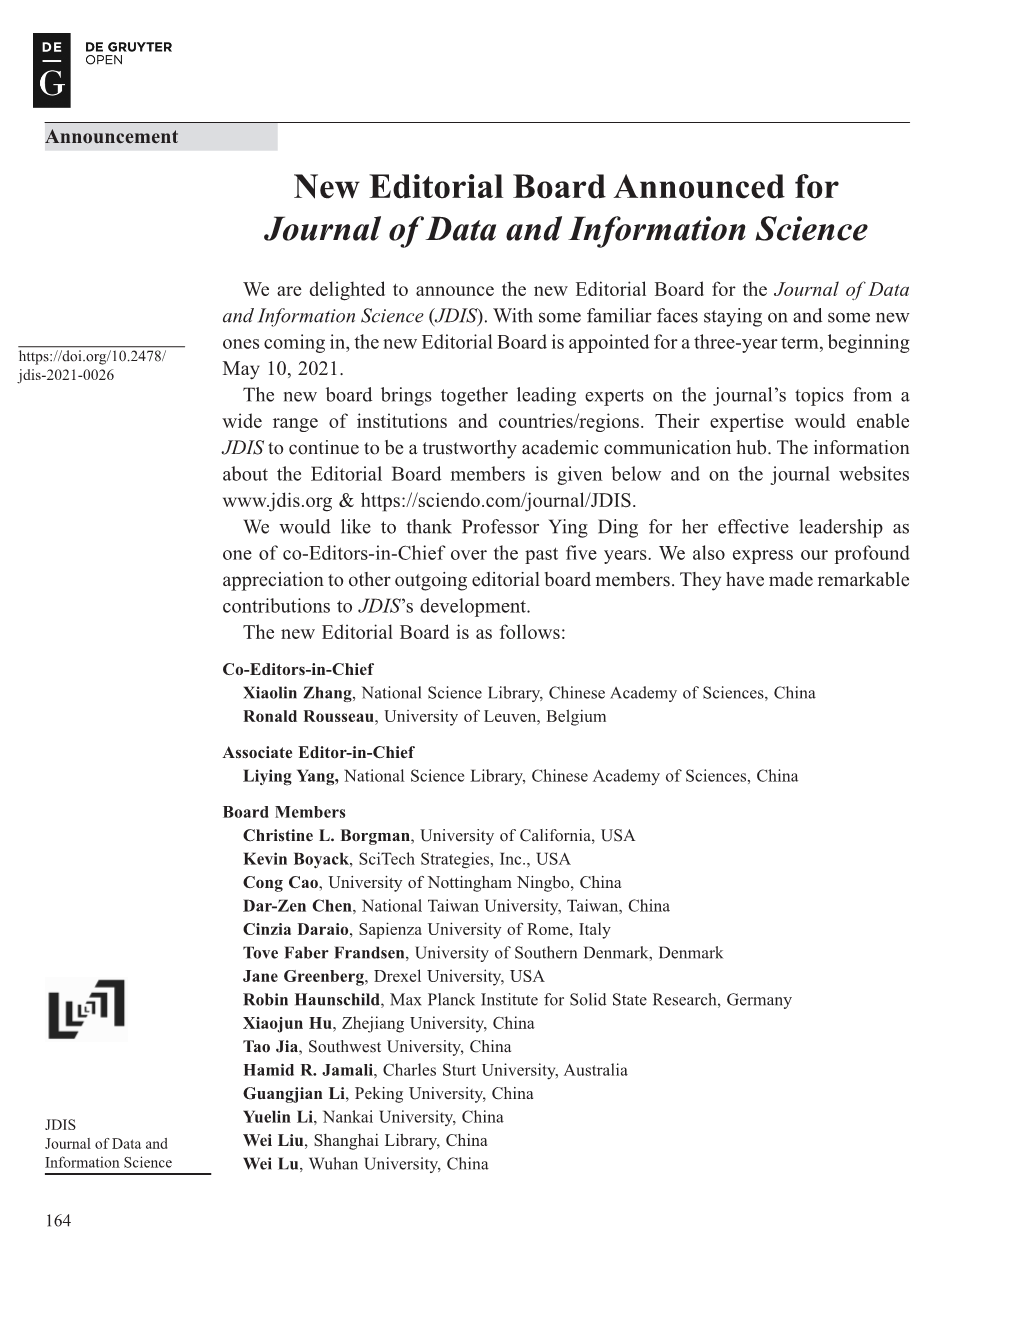 New Editorial Board Announced for Journal of Data and Information Science